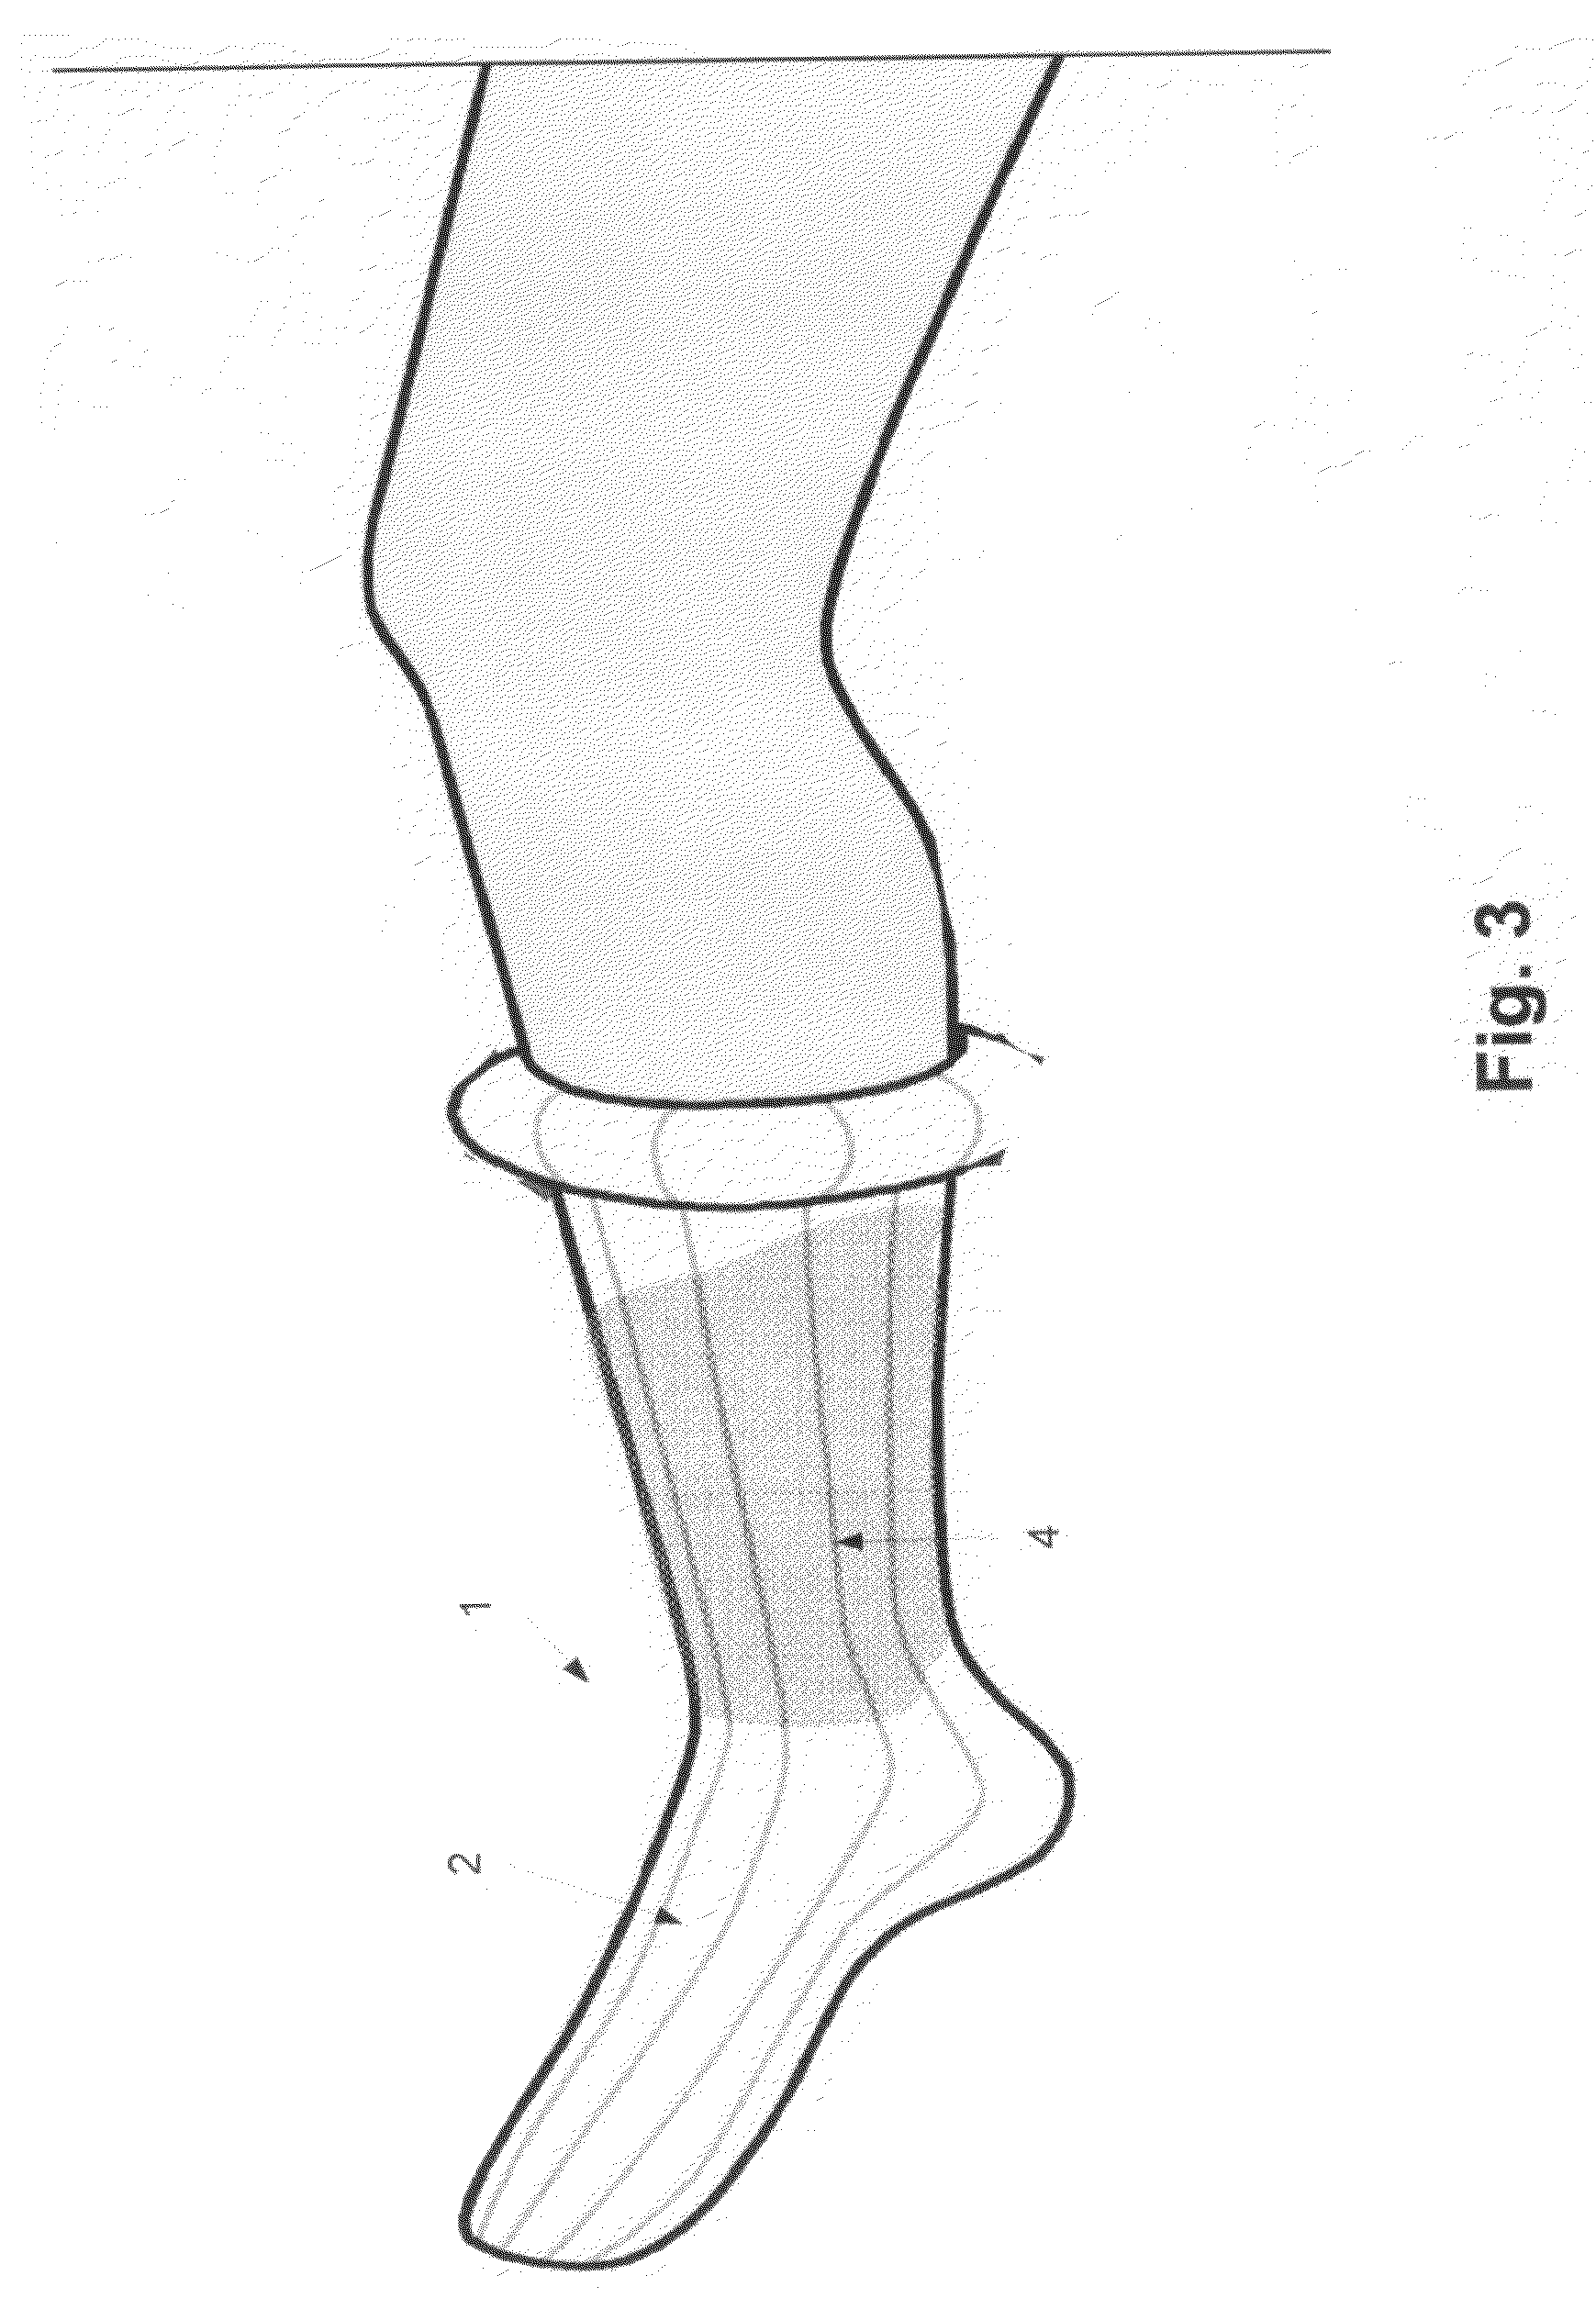 Medical device and a method for applying a biochemically active material on one or more body parts